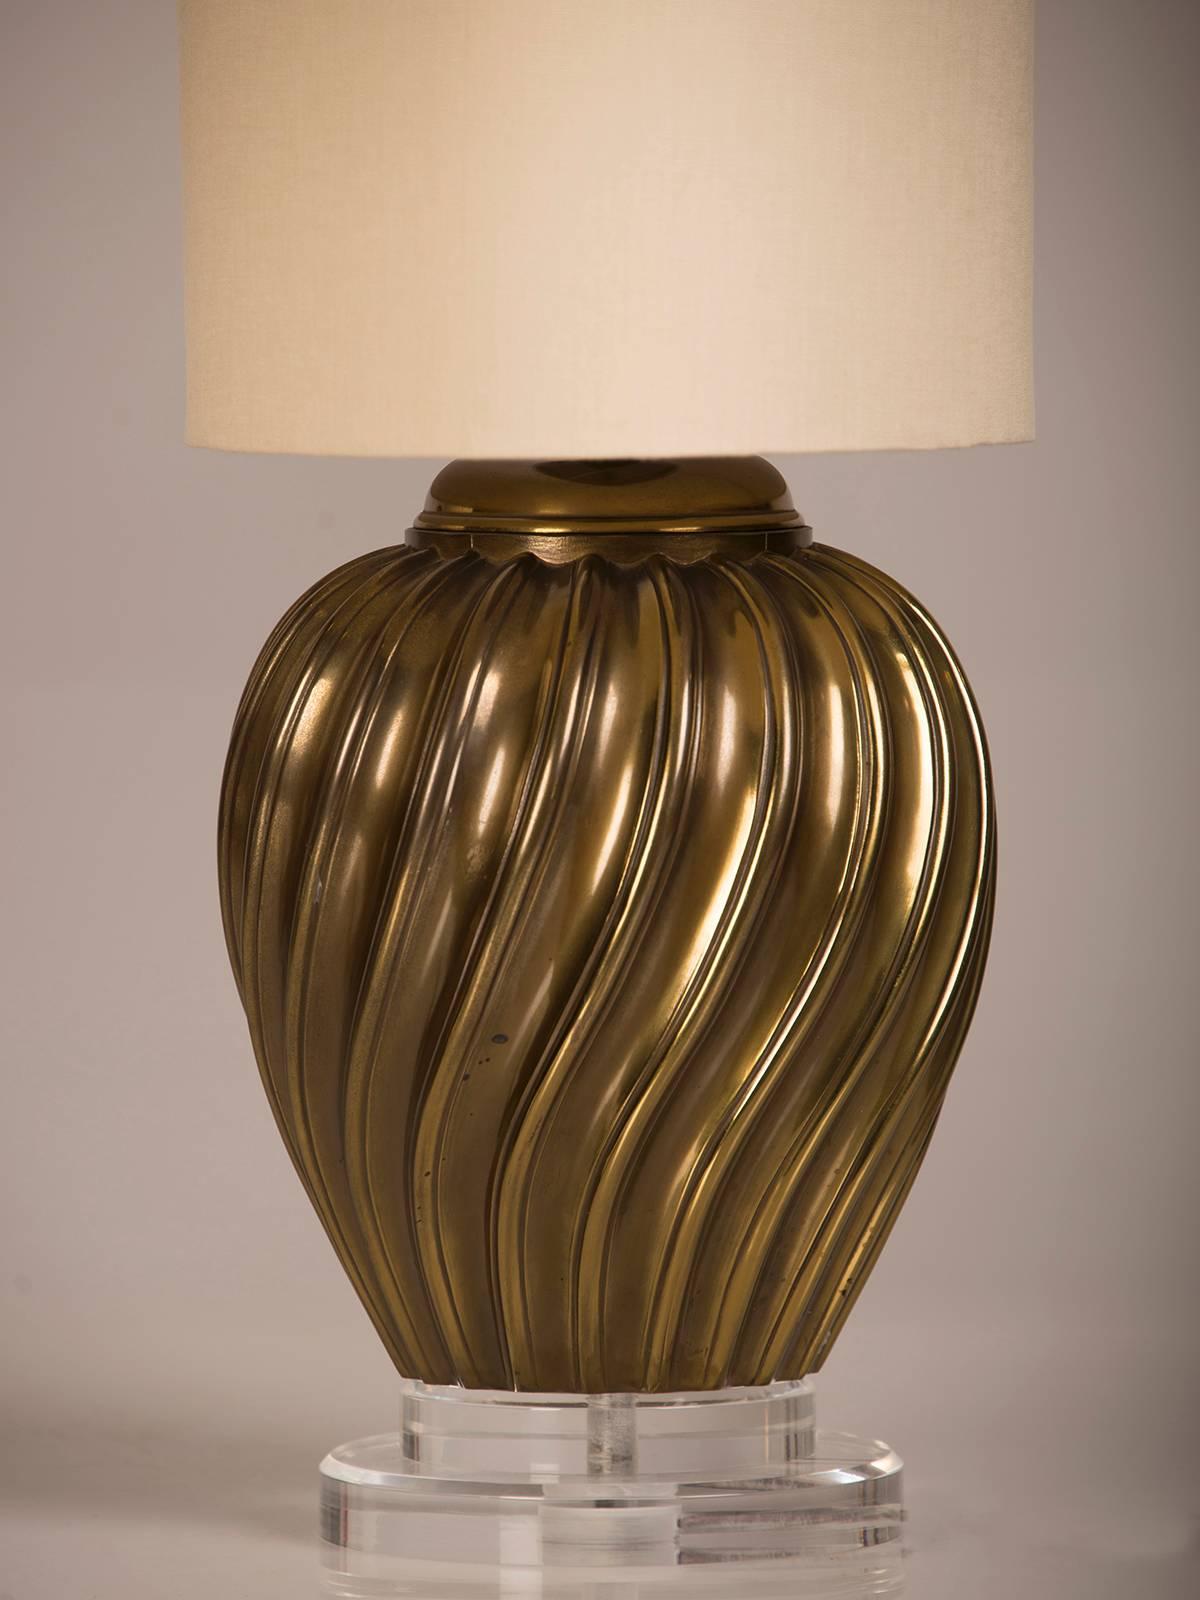 Mid-20th Century Pair of Italian Vintage Brass Swirl Vases Mounted as Custom Lamps, circa 1950 For Sale